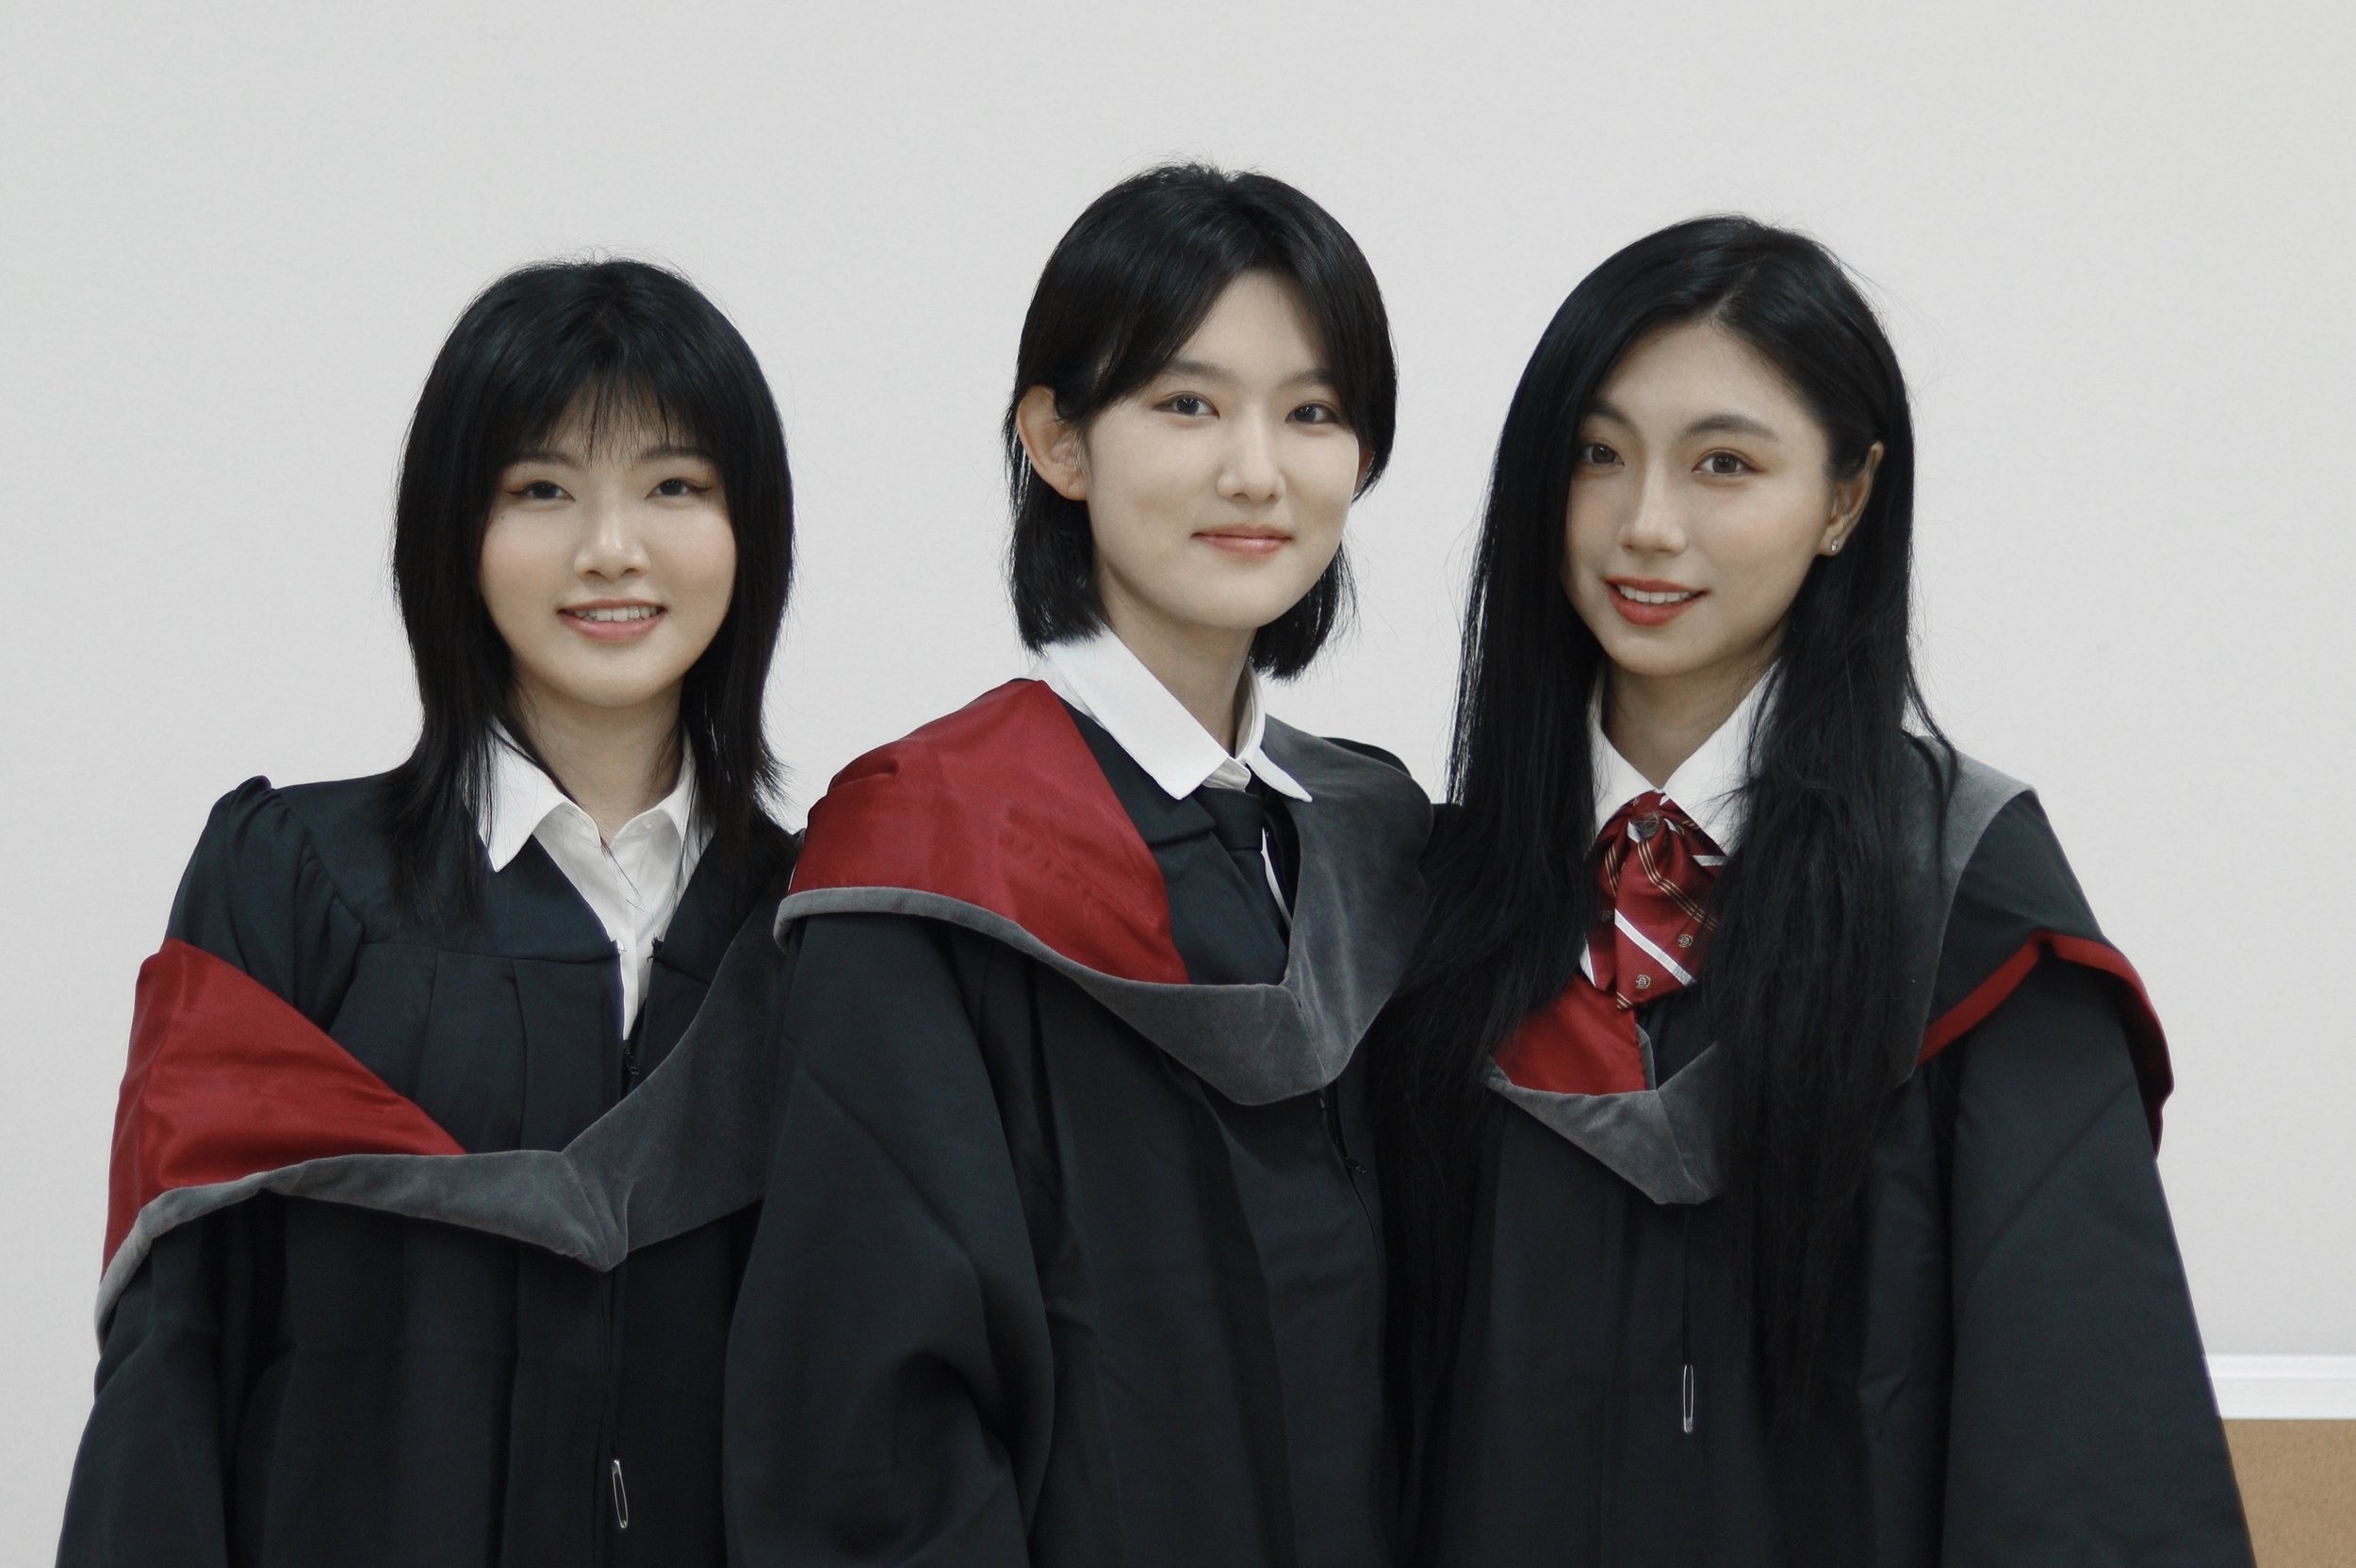  Graduates from the Joint BComm Program complete 2 degrees: a Bachelor of Commerce (major in finance) from SMU and a Bachelor of Economics from BNUZ. Yang Junying (left), Zhou Keke (centre) and Wu Xinye (right) pose for a photo wearing the Sobey BCom